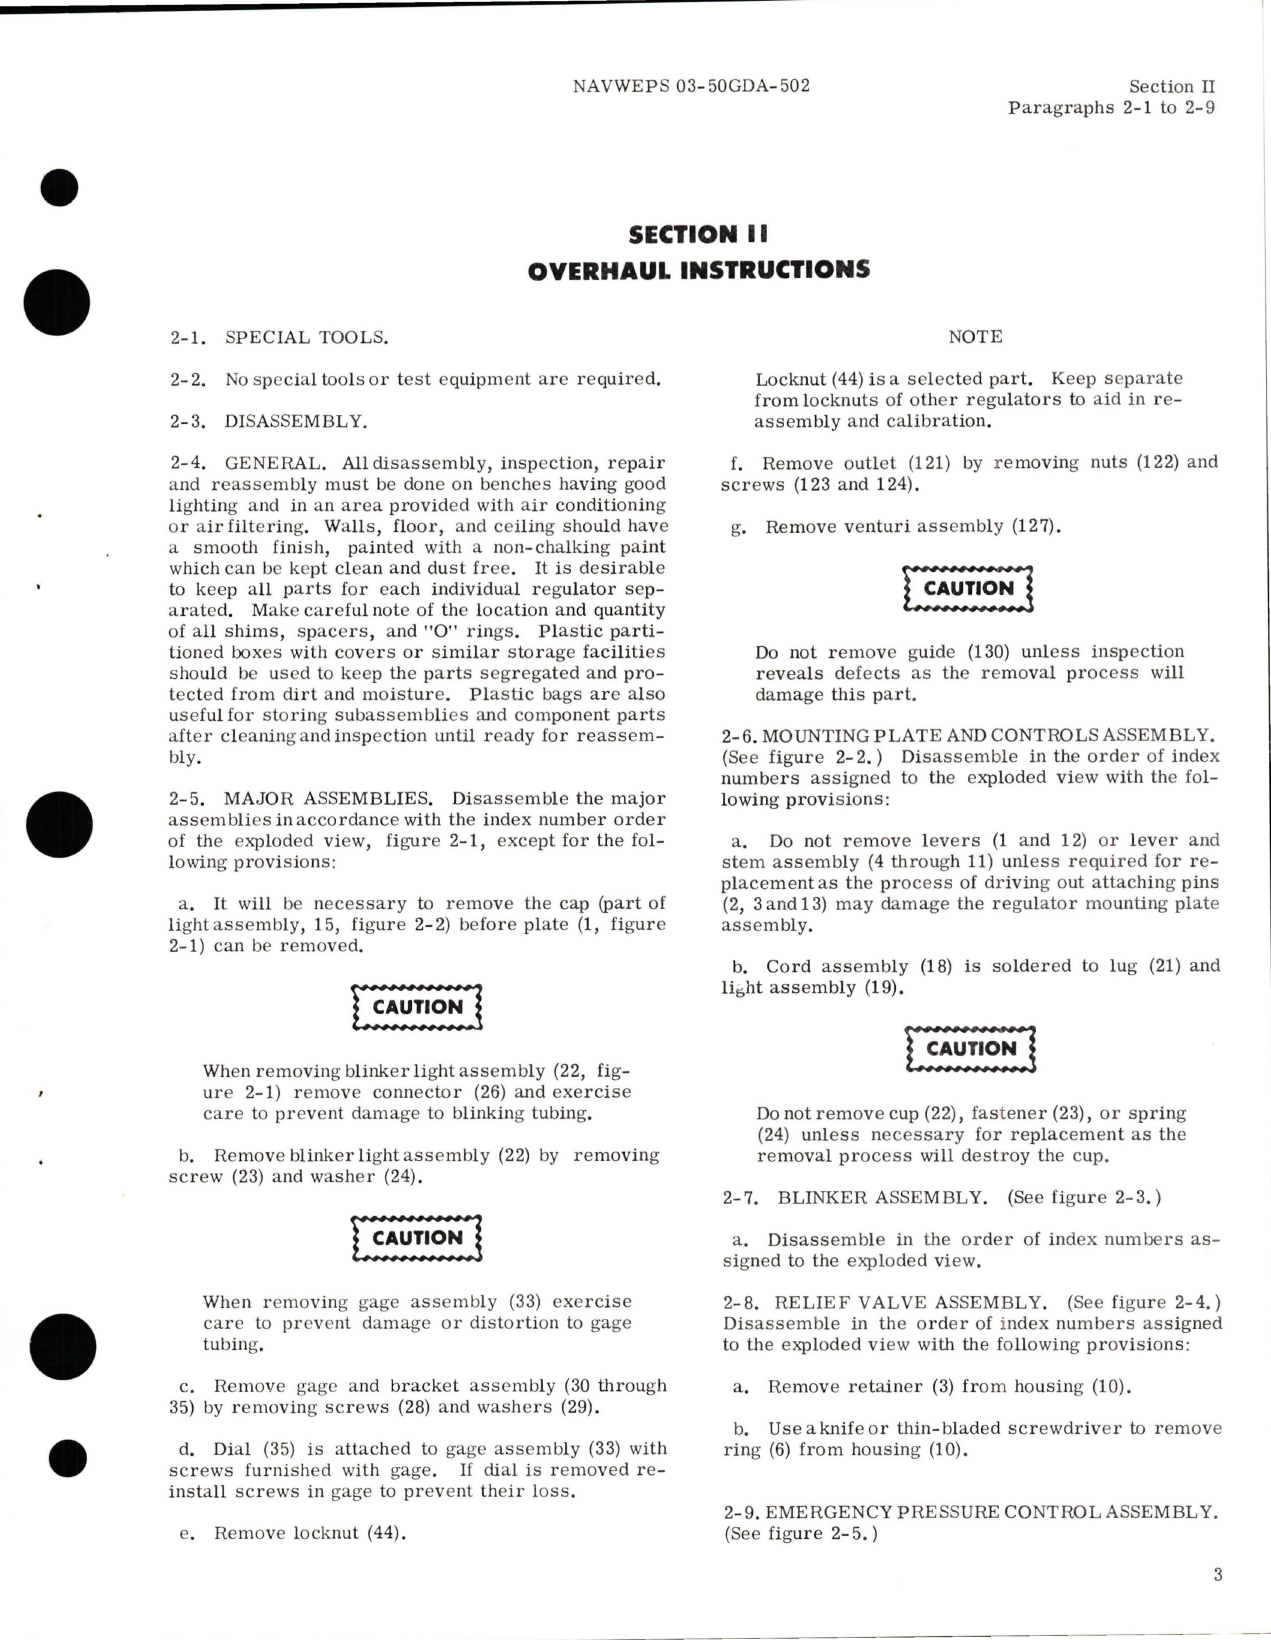 Sample page 9 from AirCorps Library document: Overhaul Instructions for Oxygen Regulator 